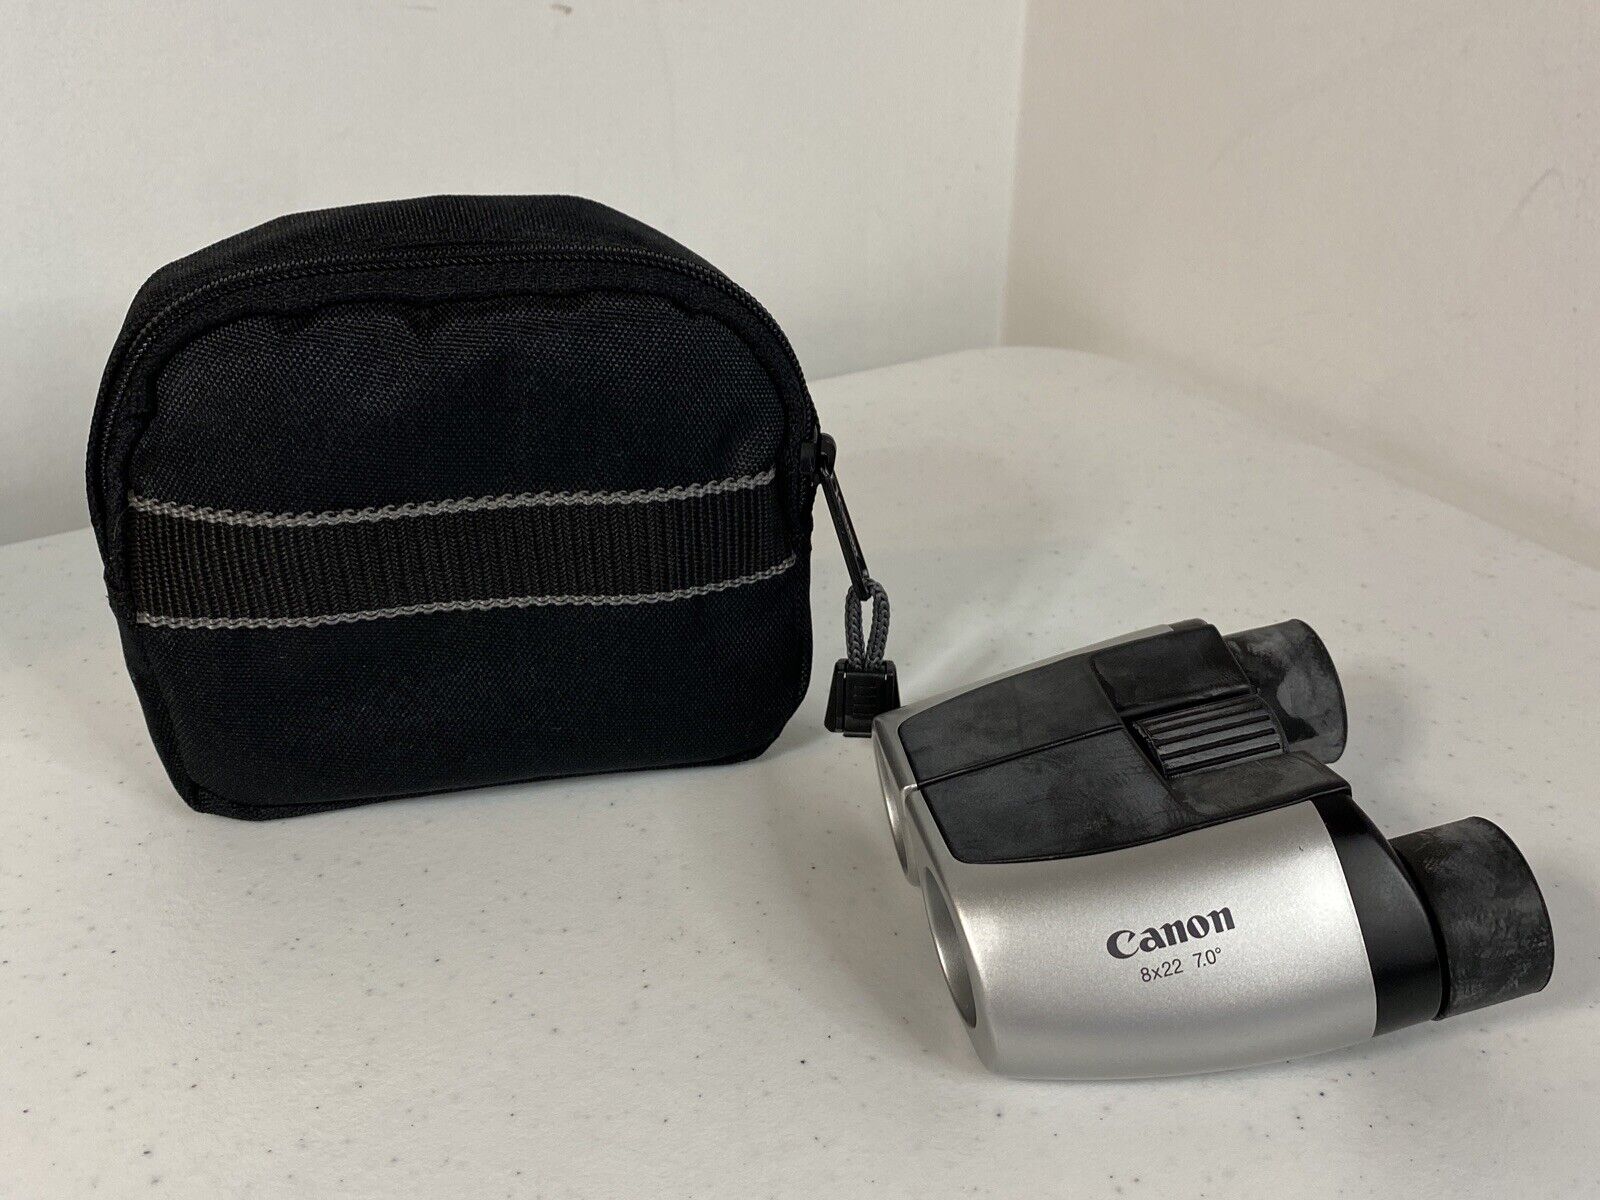 CANON 8 x 22 7.0 Degree BINOCULARS With Case Canon Compact Lightweight